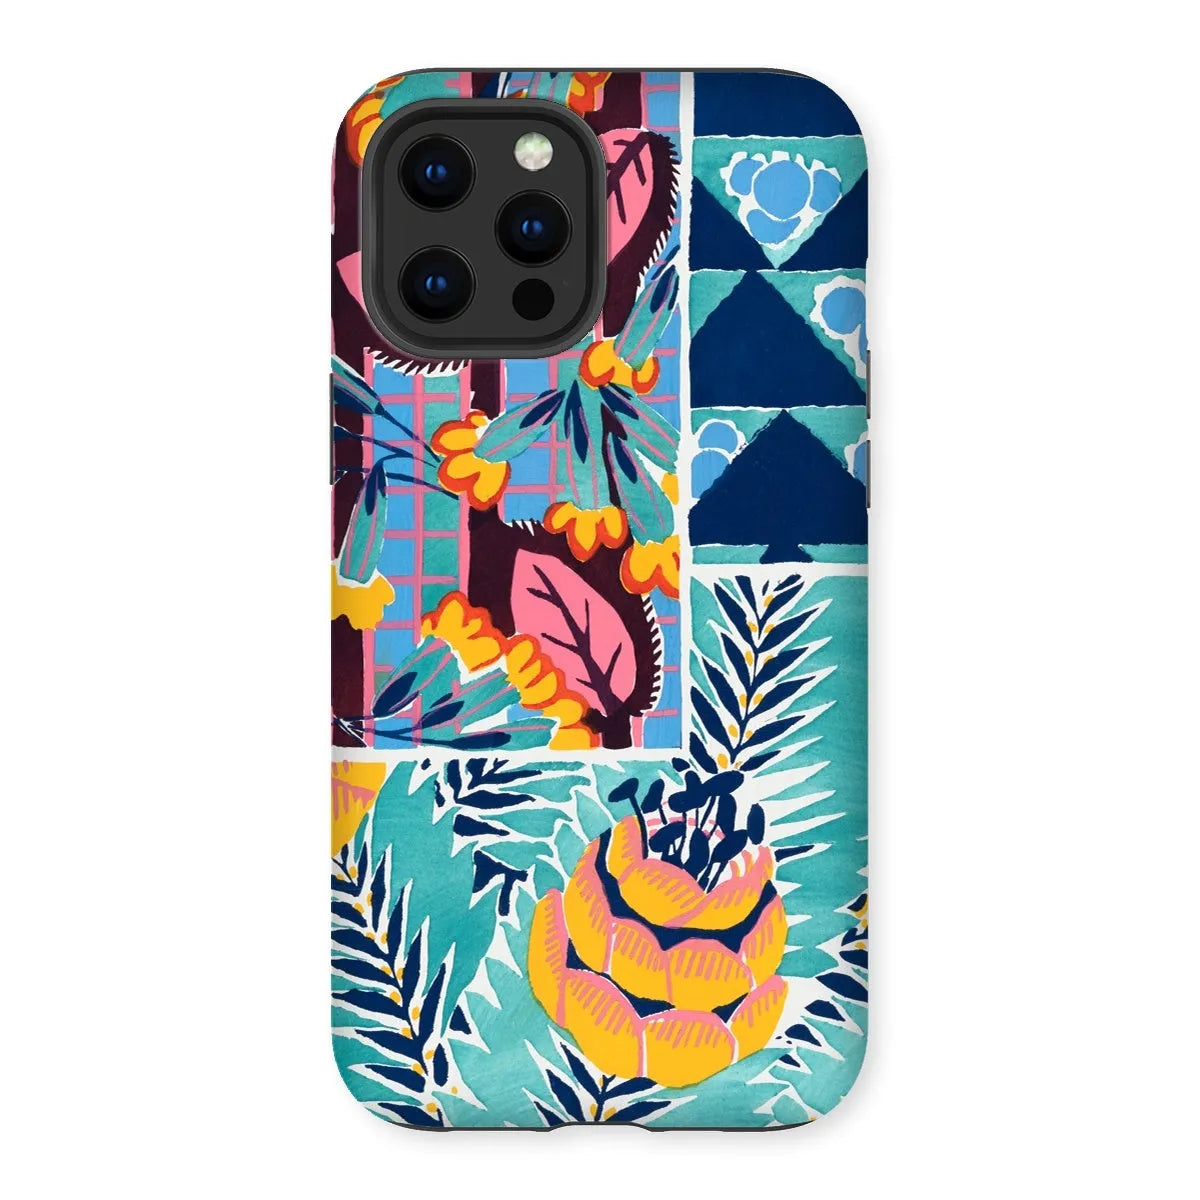 Fabric & Rugs - Pochoir Patterns Phone Case - E. A. Séguy - Iphone 12 Pro Max / Matte - Mobile Phone Cases